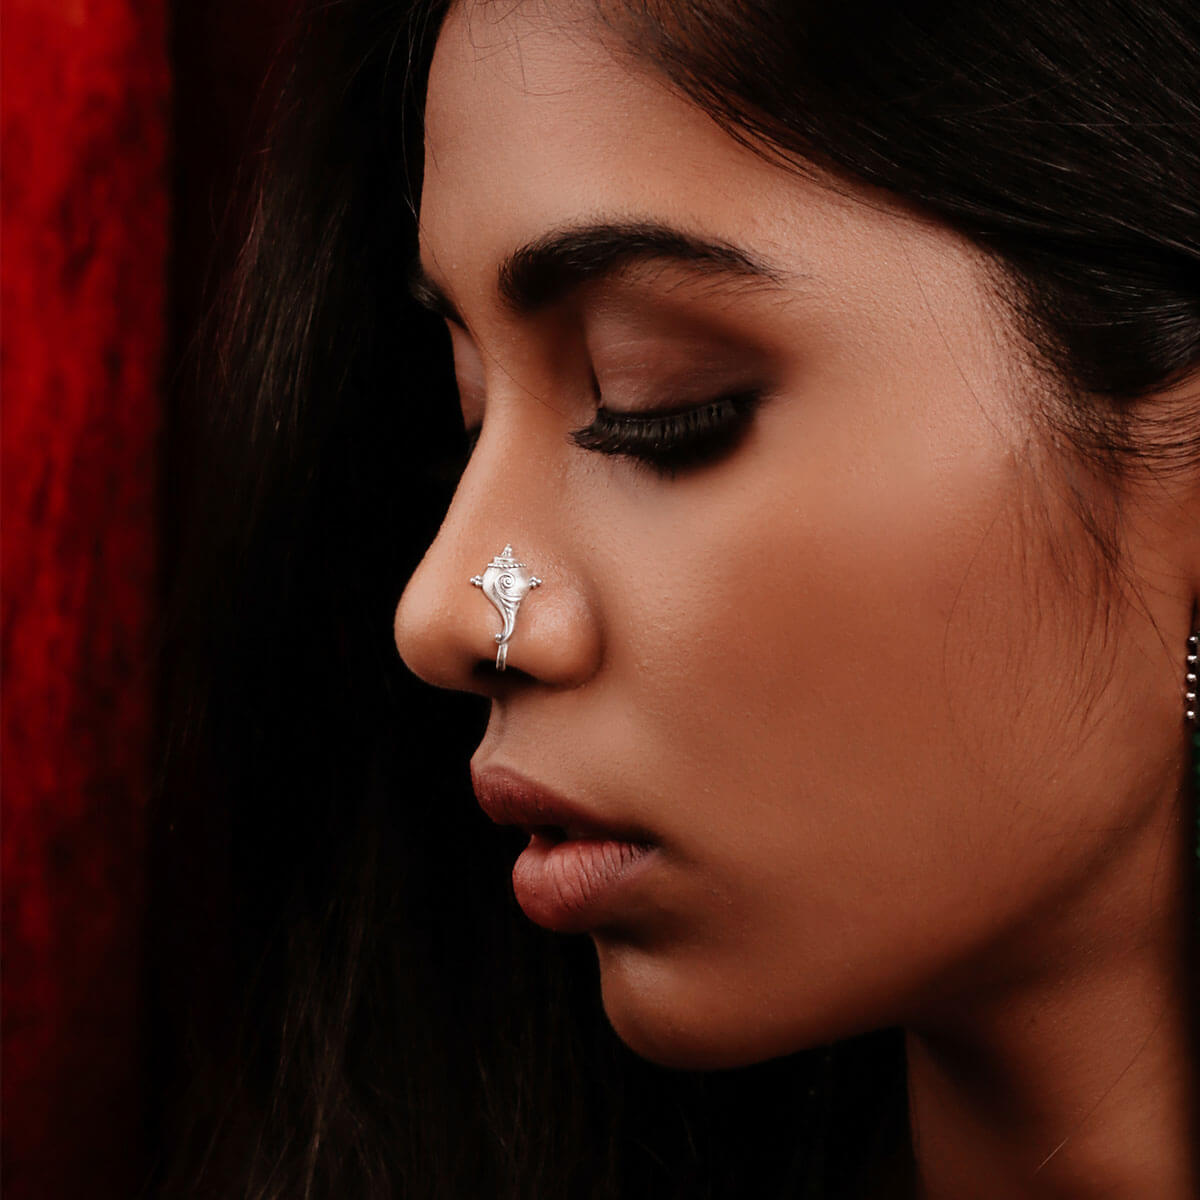 Silver nose pin | Silver jewelry fashion, Oxidised jewellery, Nose ring